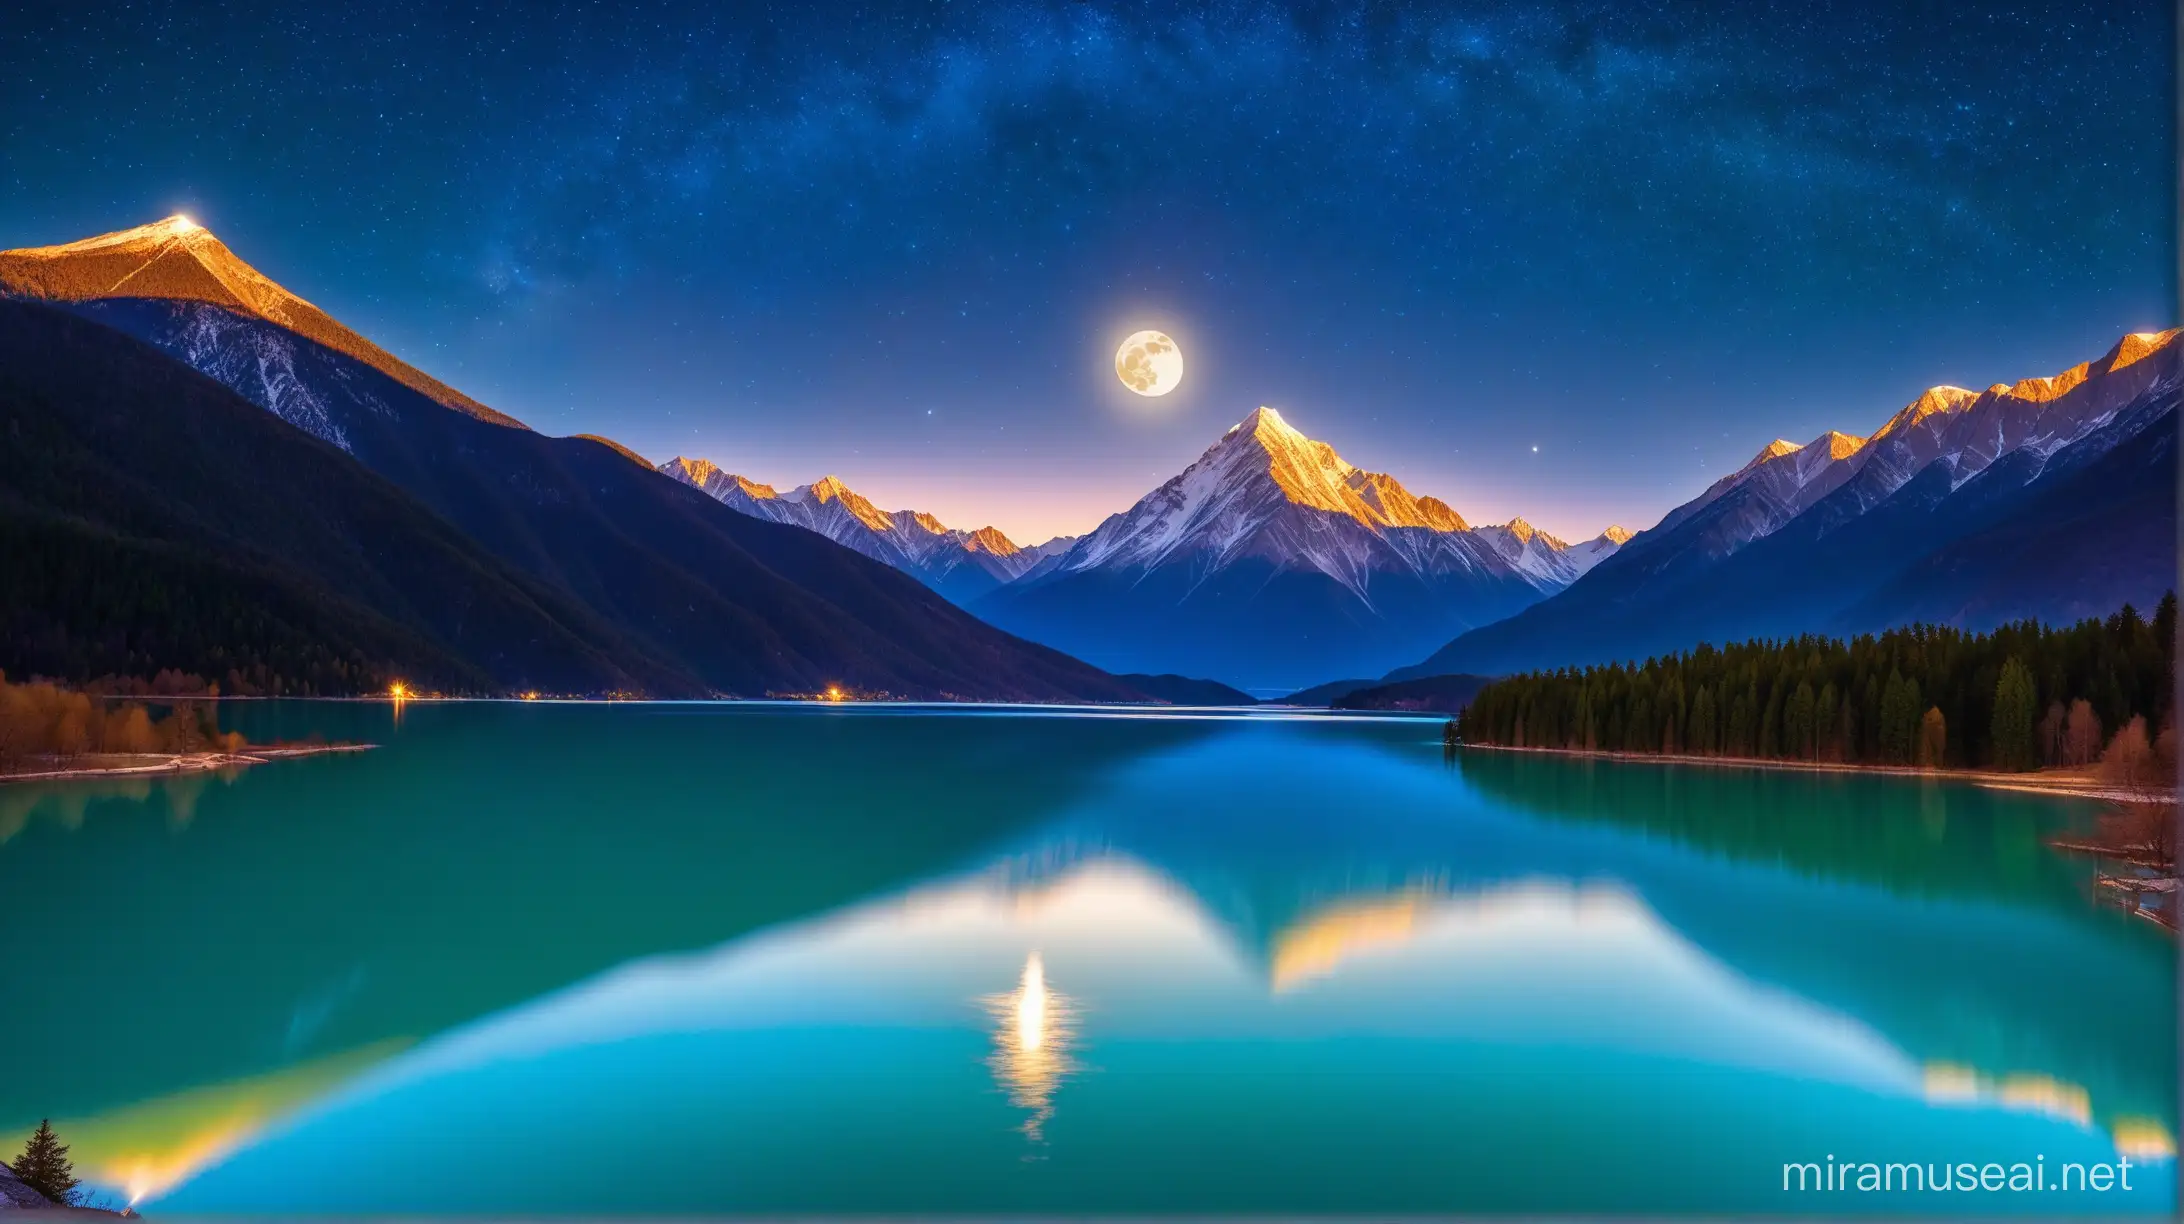 stars+lake+moon amezing+beatiful+
mountain(THIS PICTURE MUST BE PERFECT)